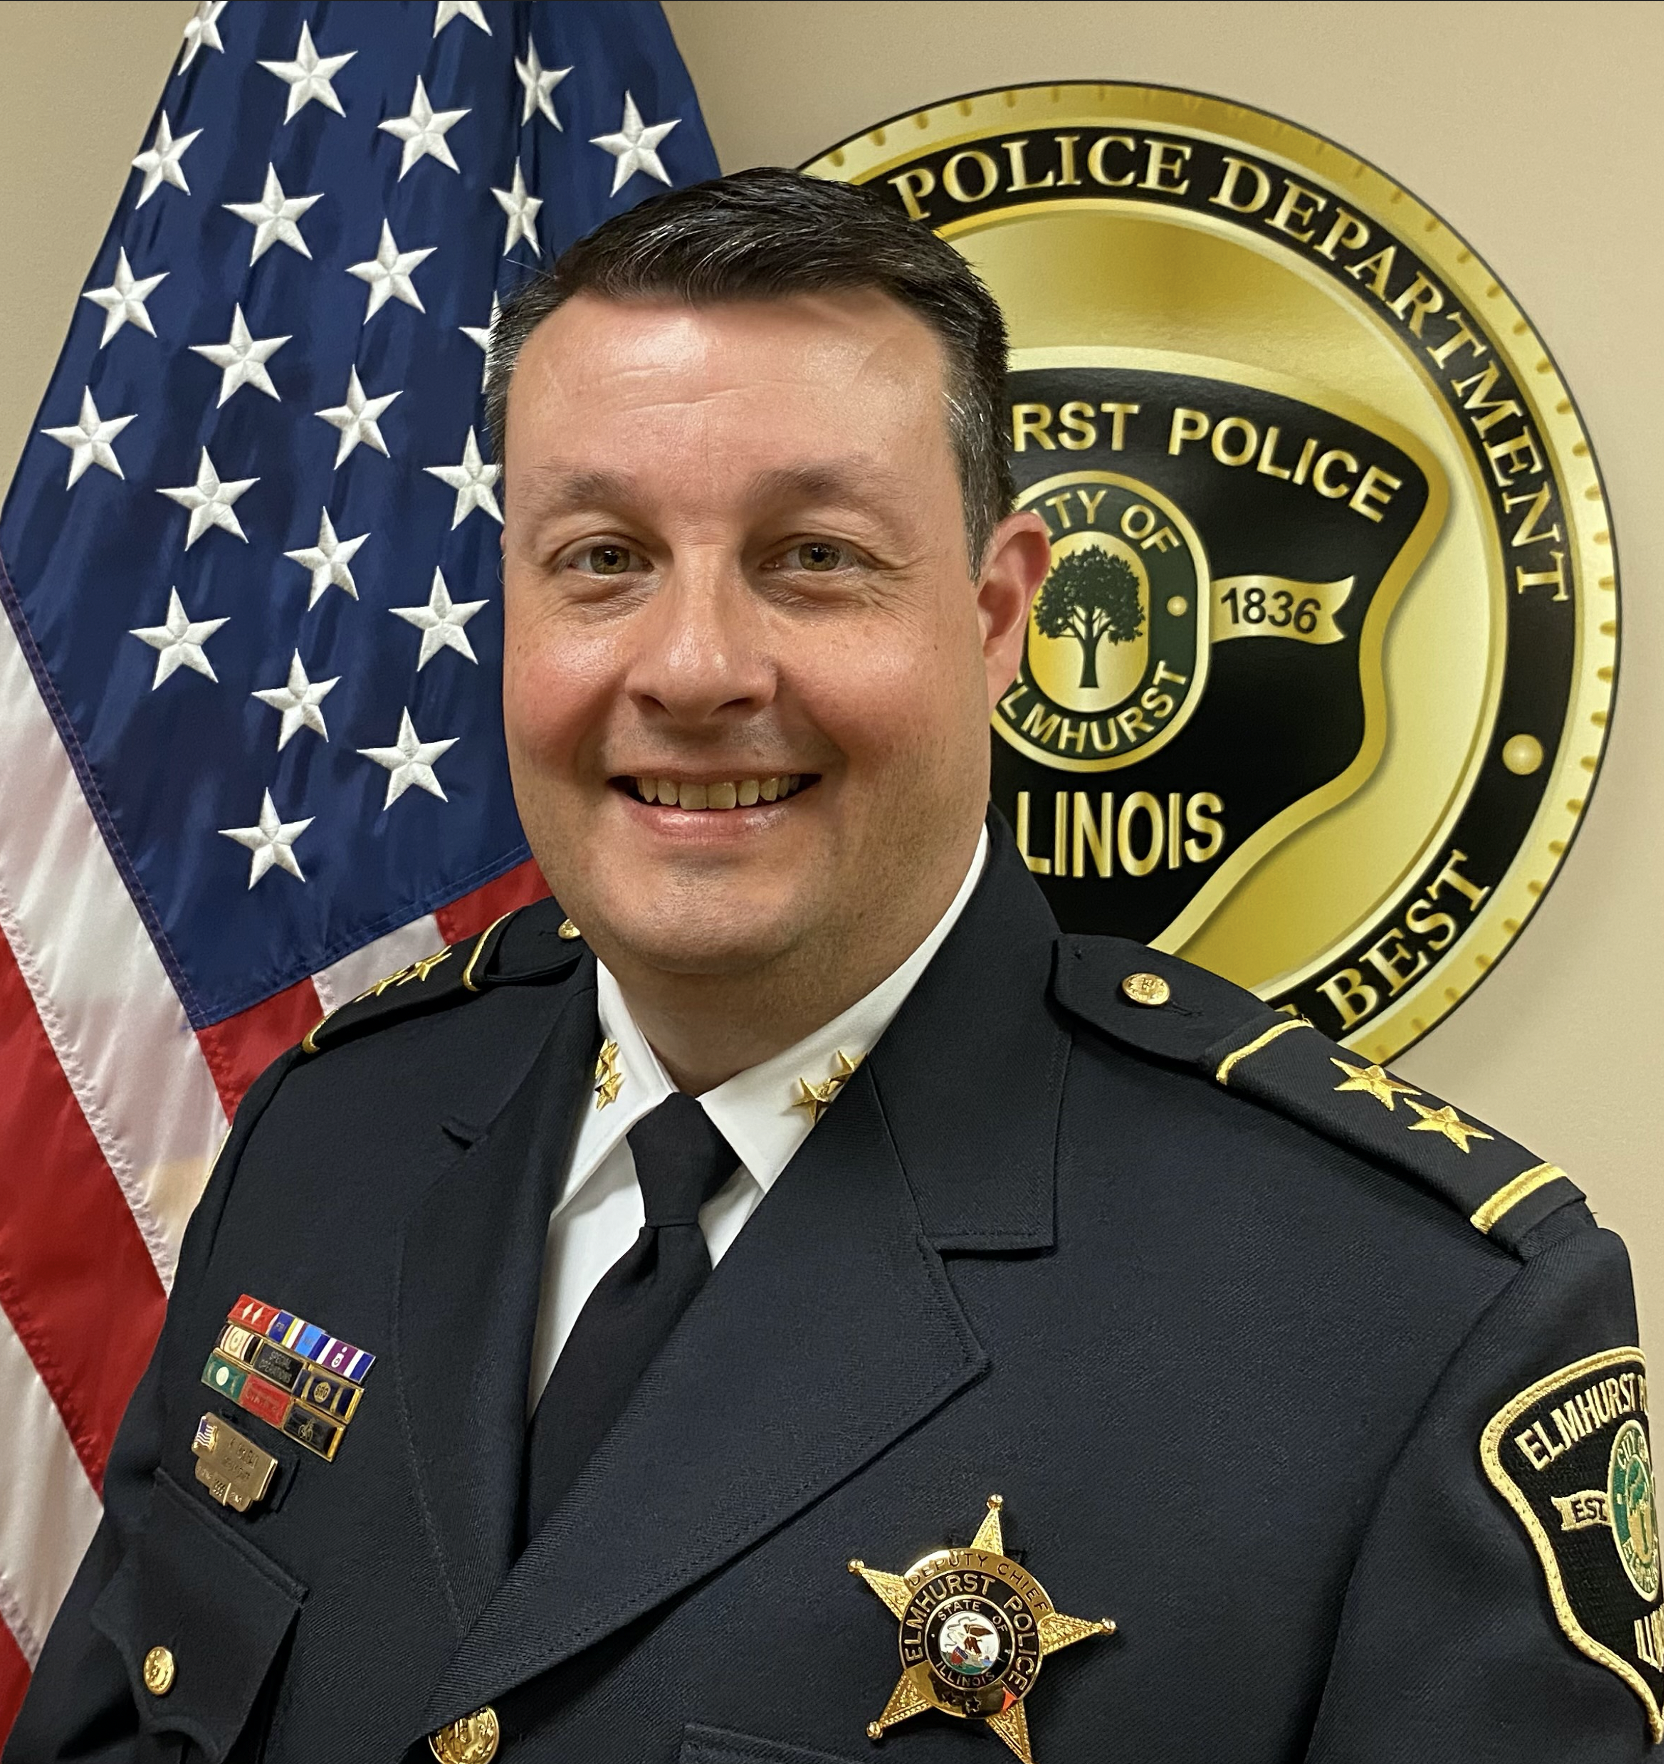 Michael McLean to be appointed Chief of the Elmhurst Police Department; Interim chief has strong educational background, experience in community